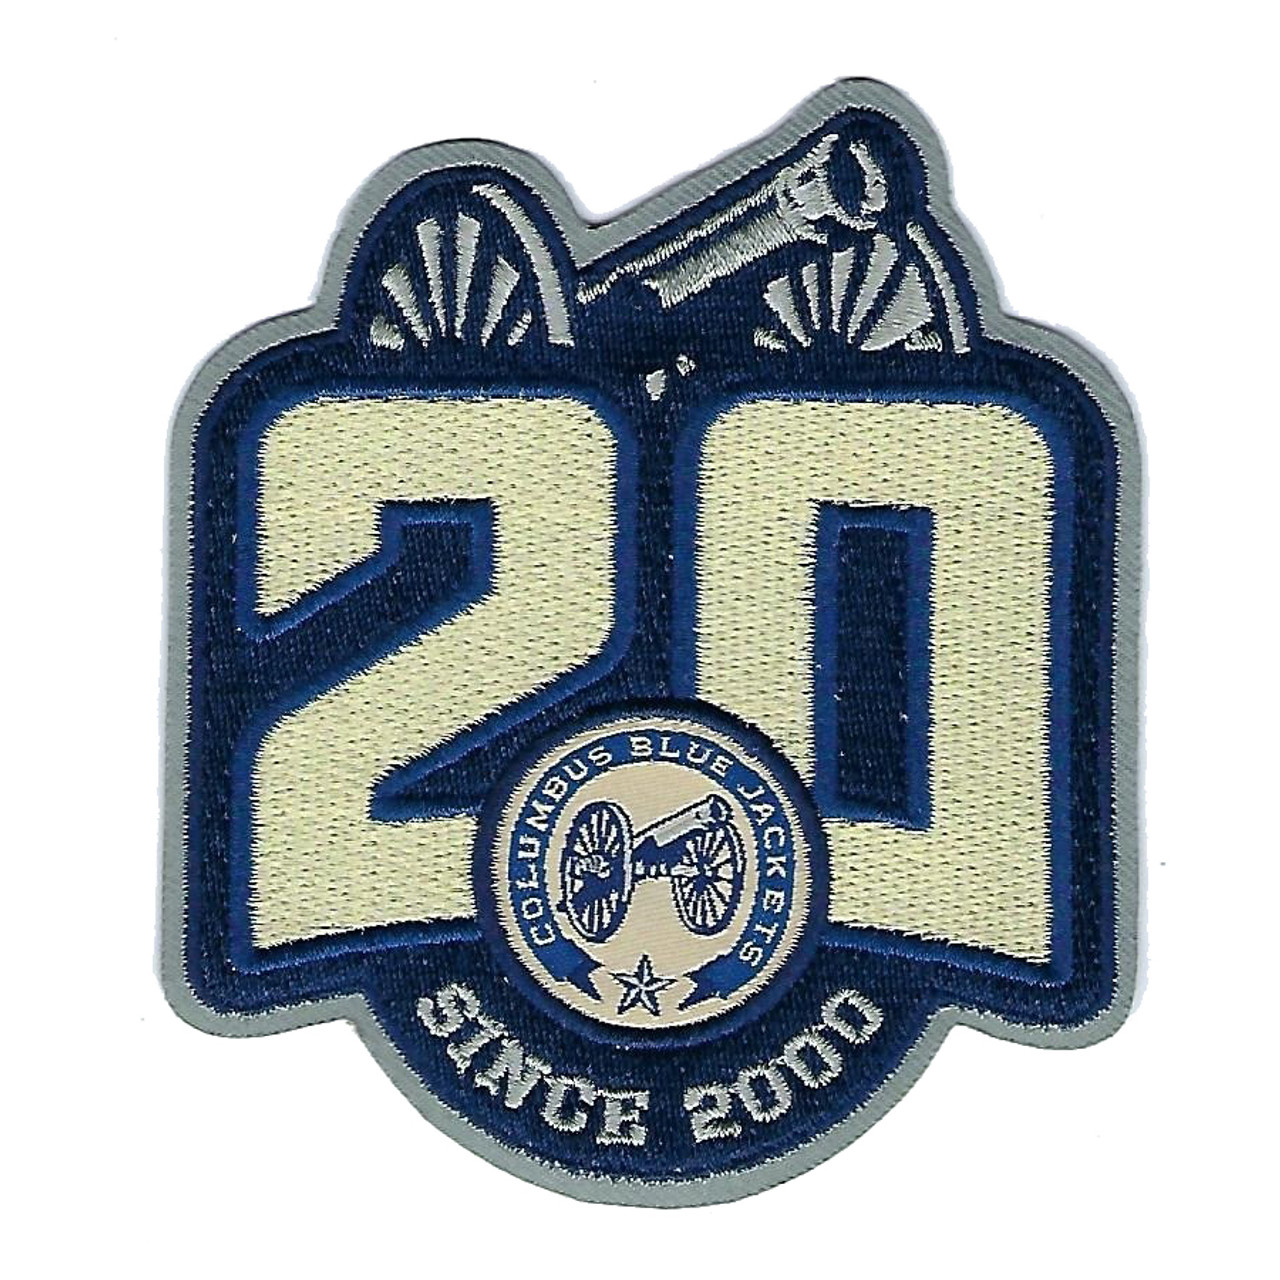 20th Anniversary patch for the new alternate jerseys.